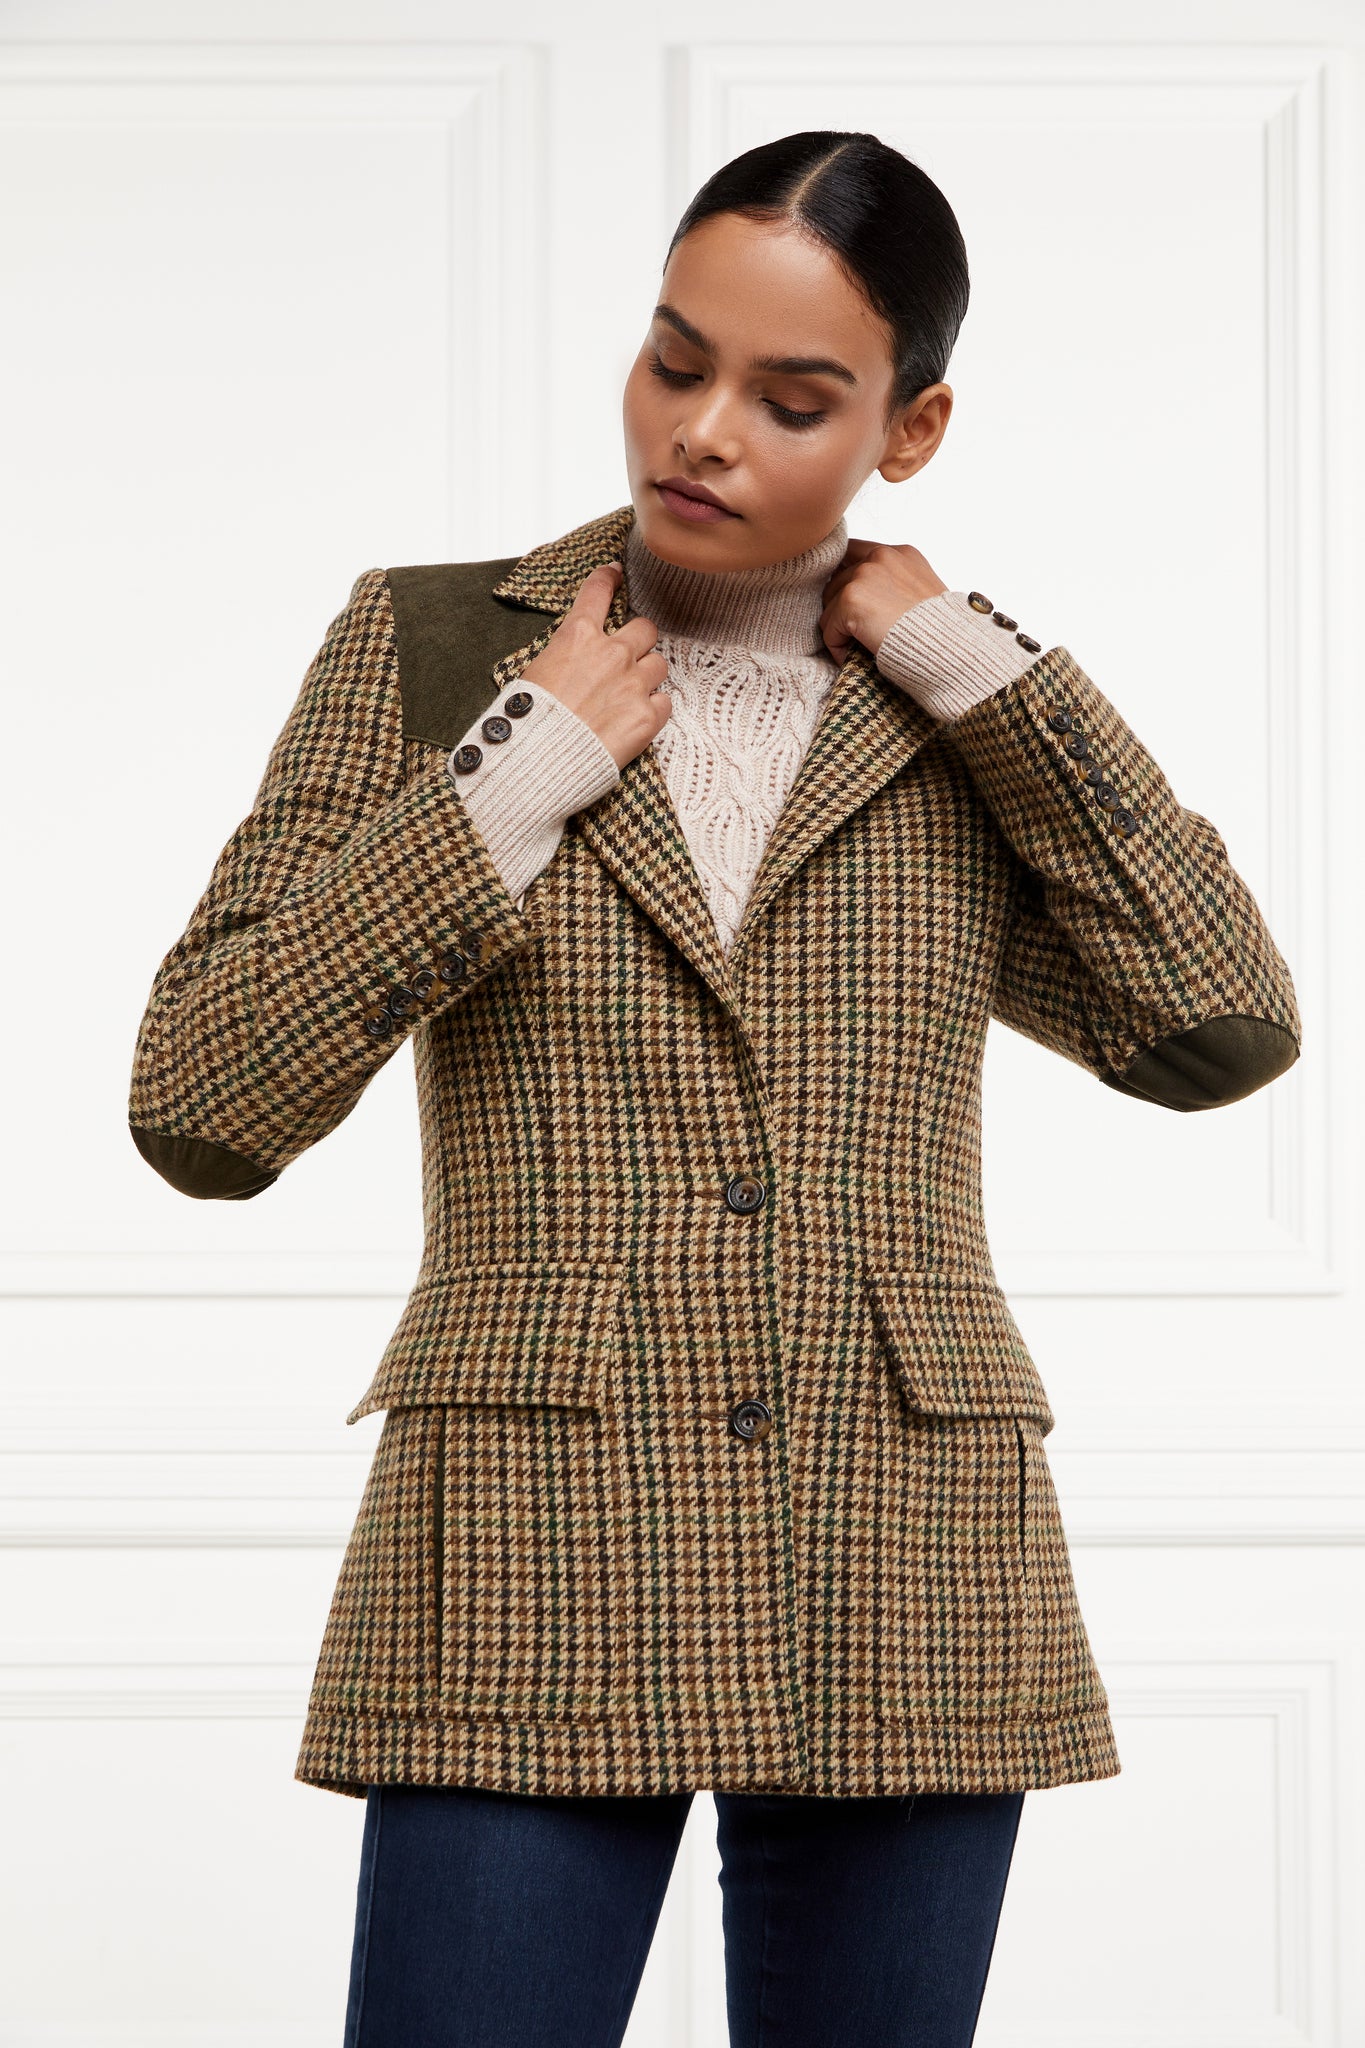 womens classic slim fit single breasted blazer in green tan and brown houndstooth tweed with lower patch pockets with concealed button flap contrast khaki suede shoulder gun patch with elbow patches and horn button finish on cuffs and front